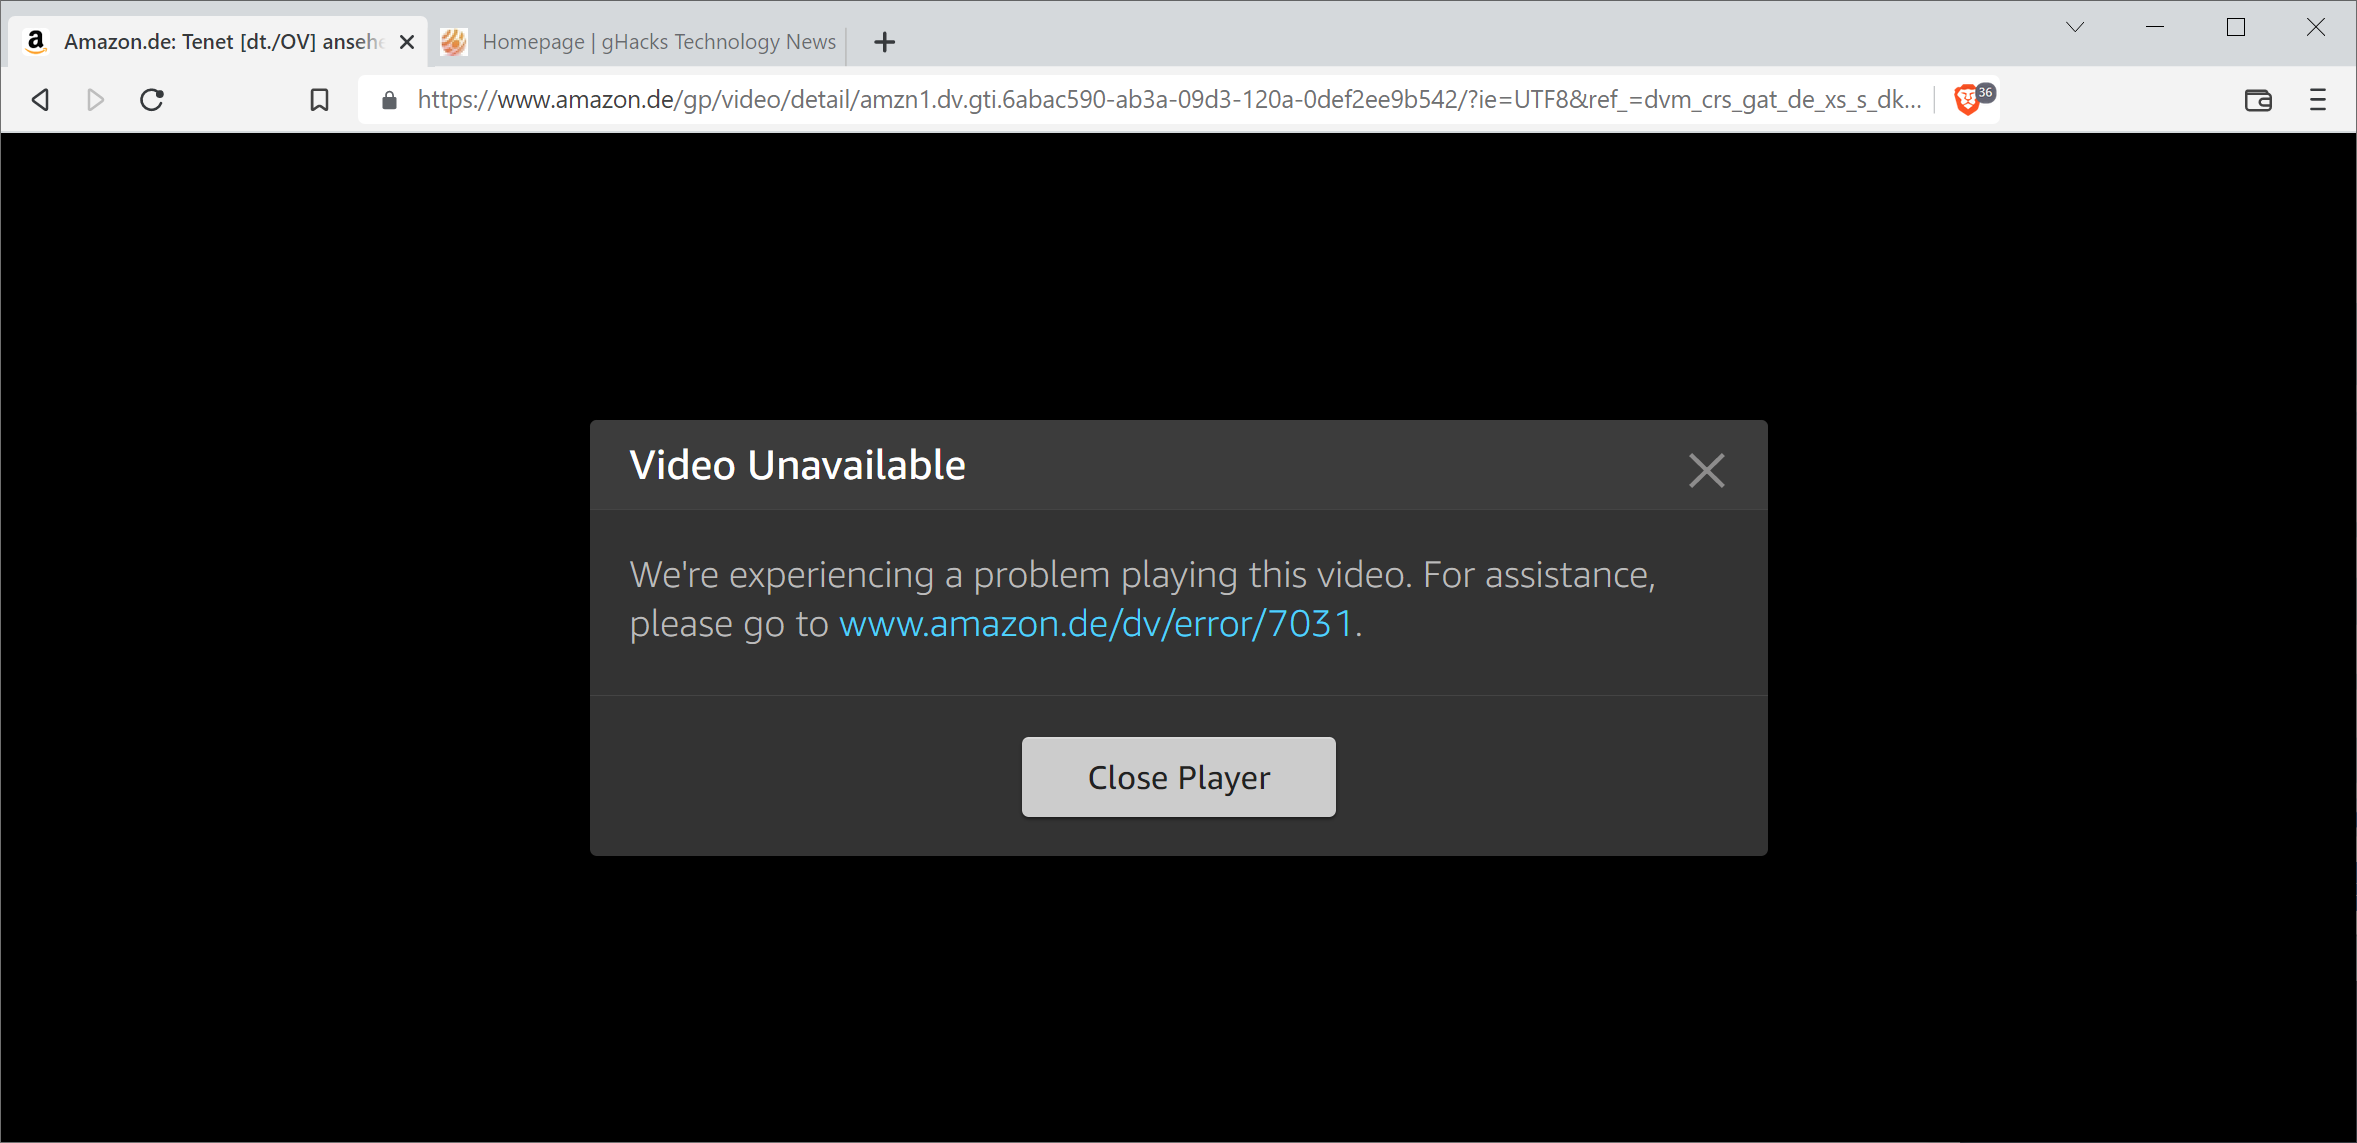 How to Fix It When  Prime Video Is Not Working